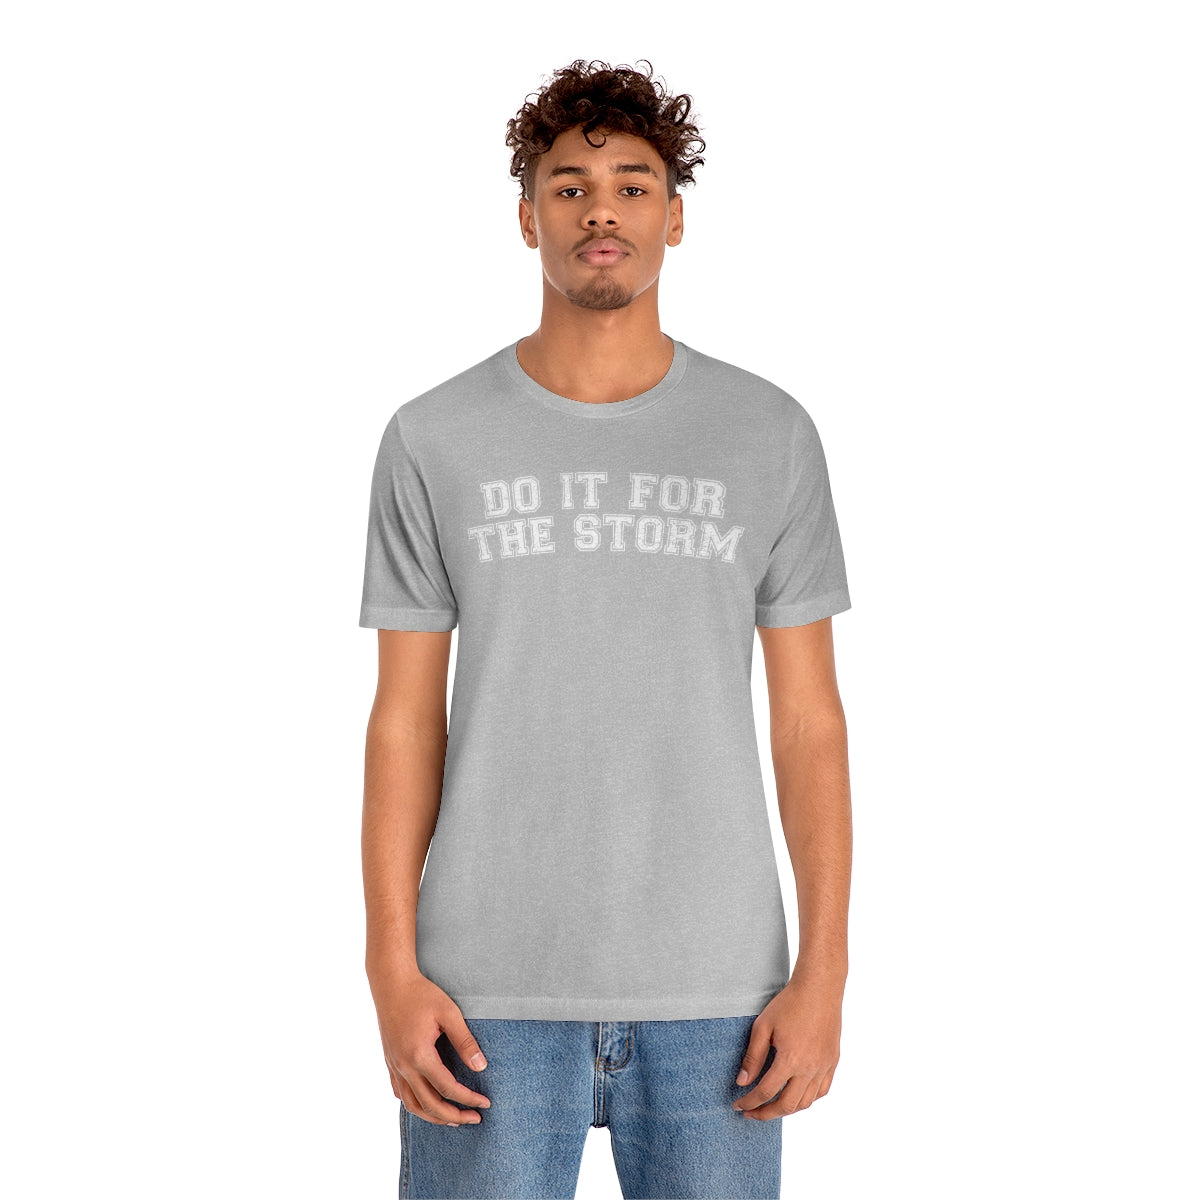 Do It For The Storm Tee 